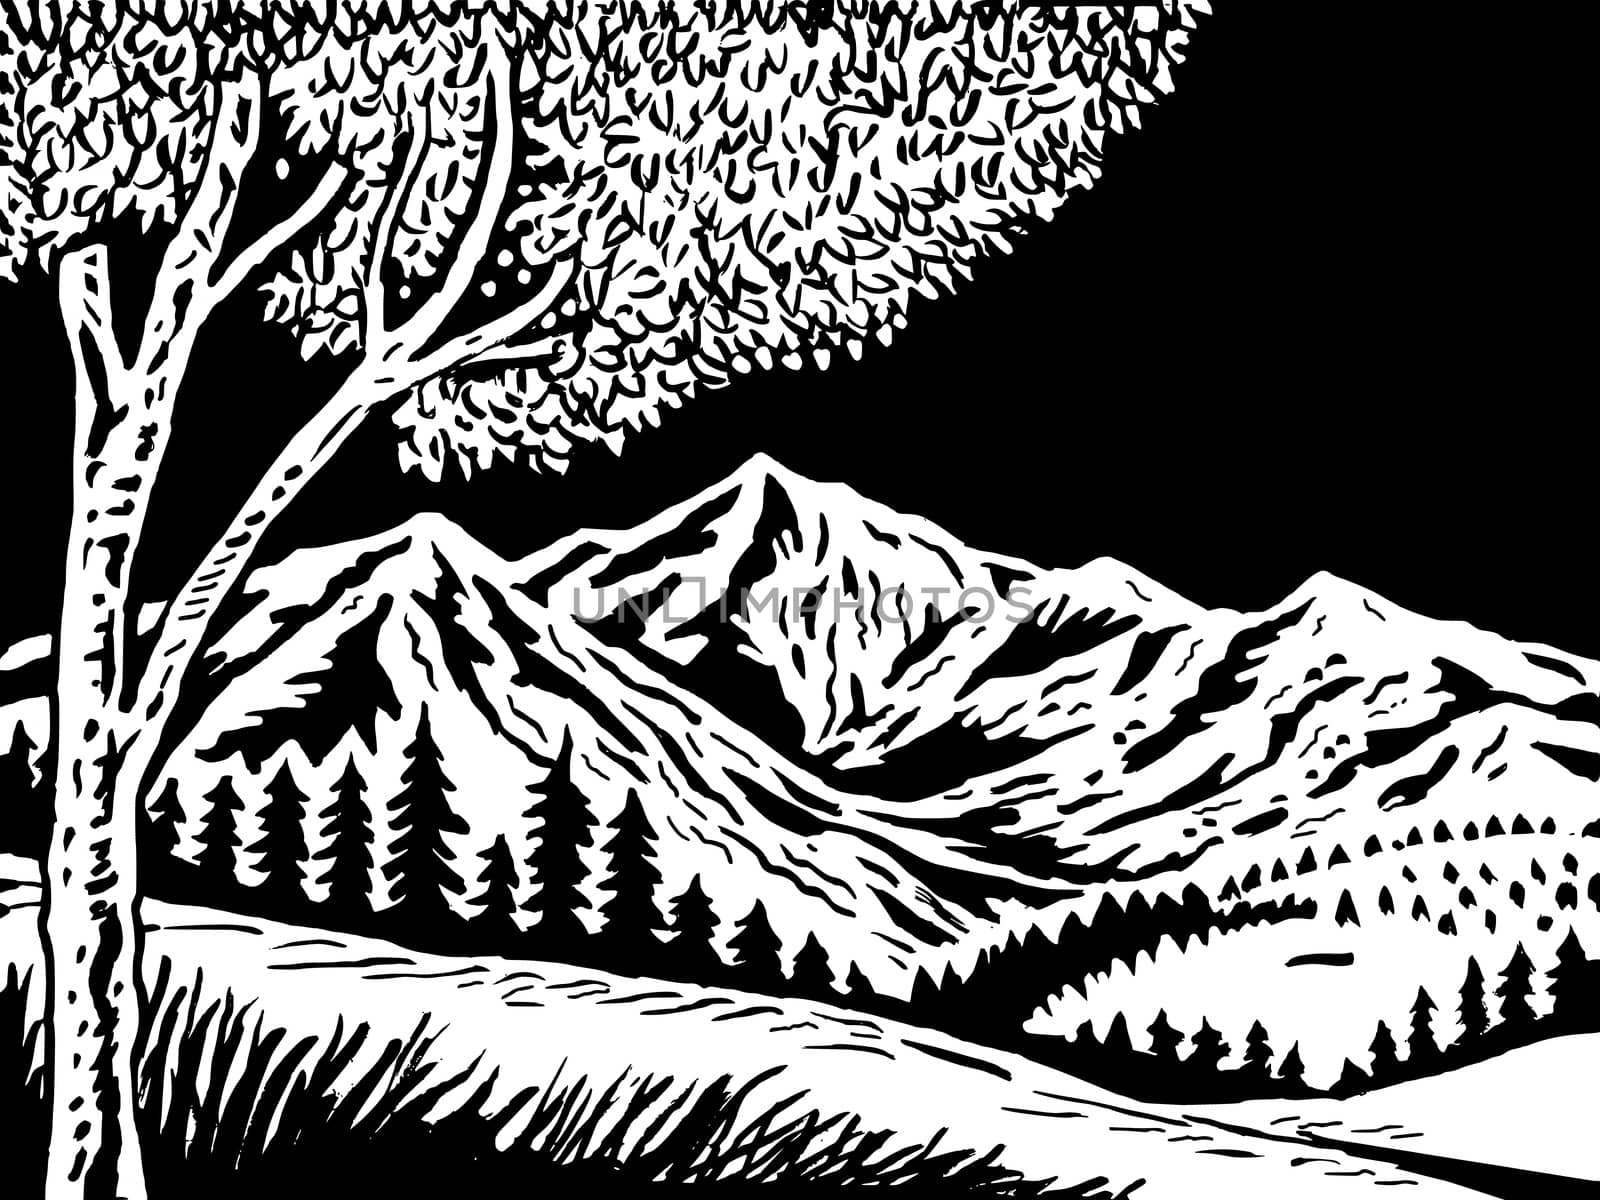 illustration of a Mountain scene with tree in foreground doen in black and white